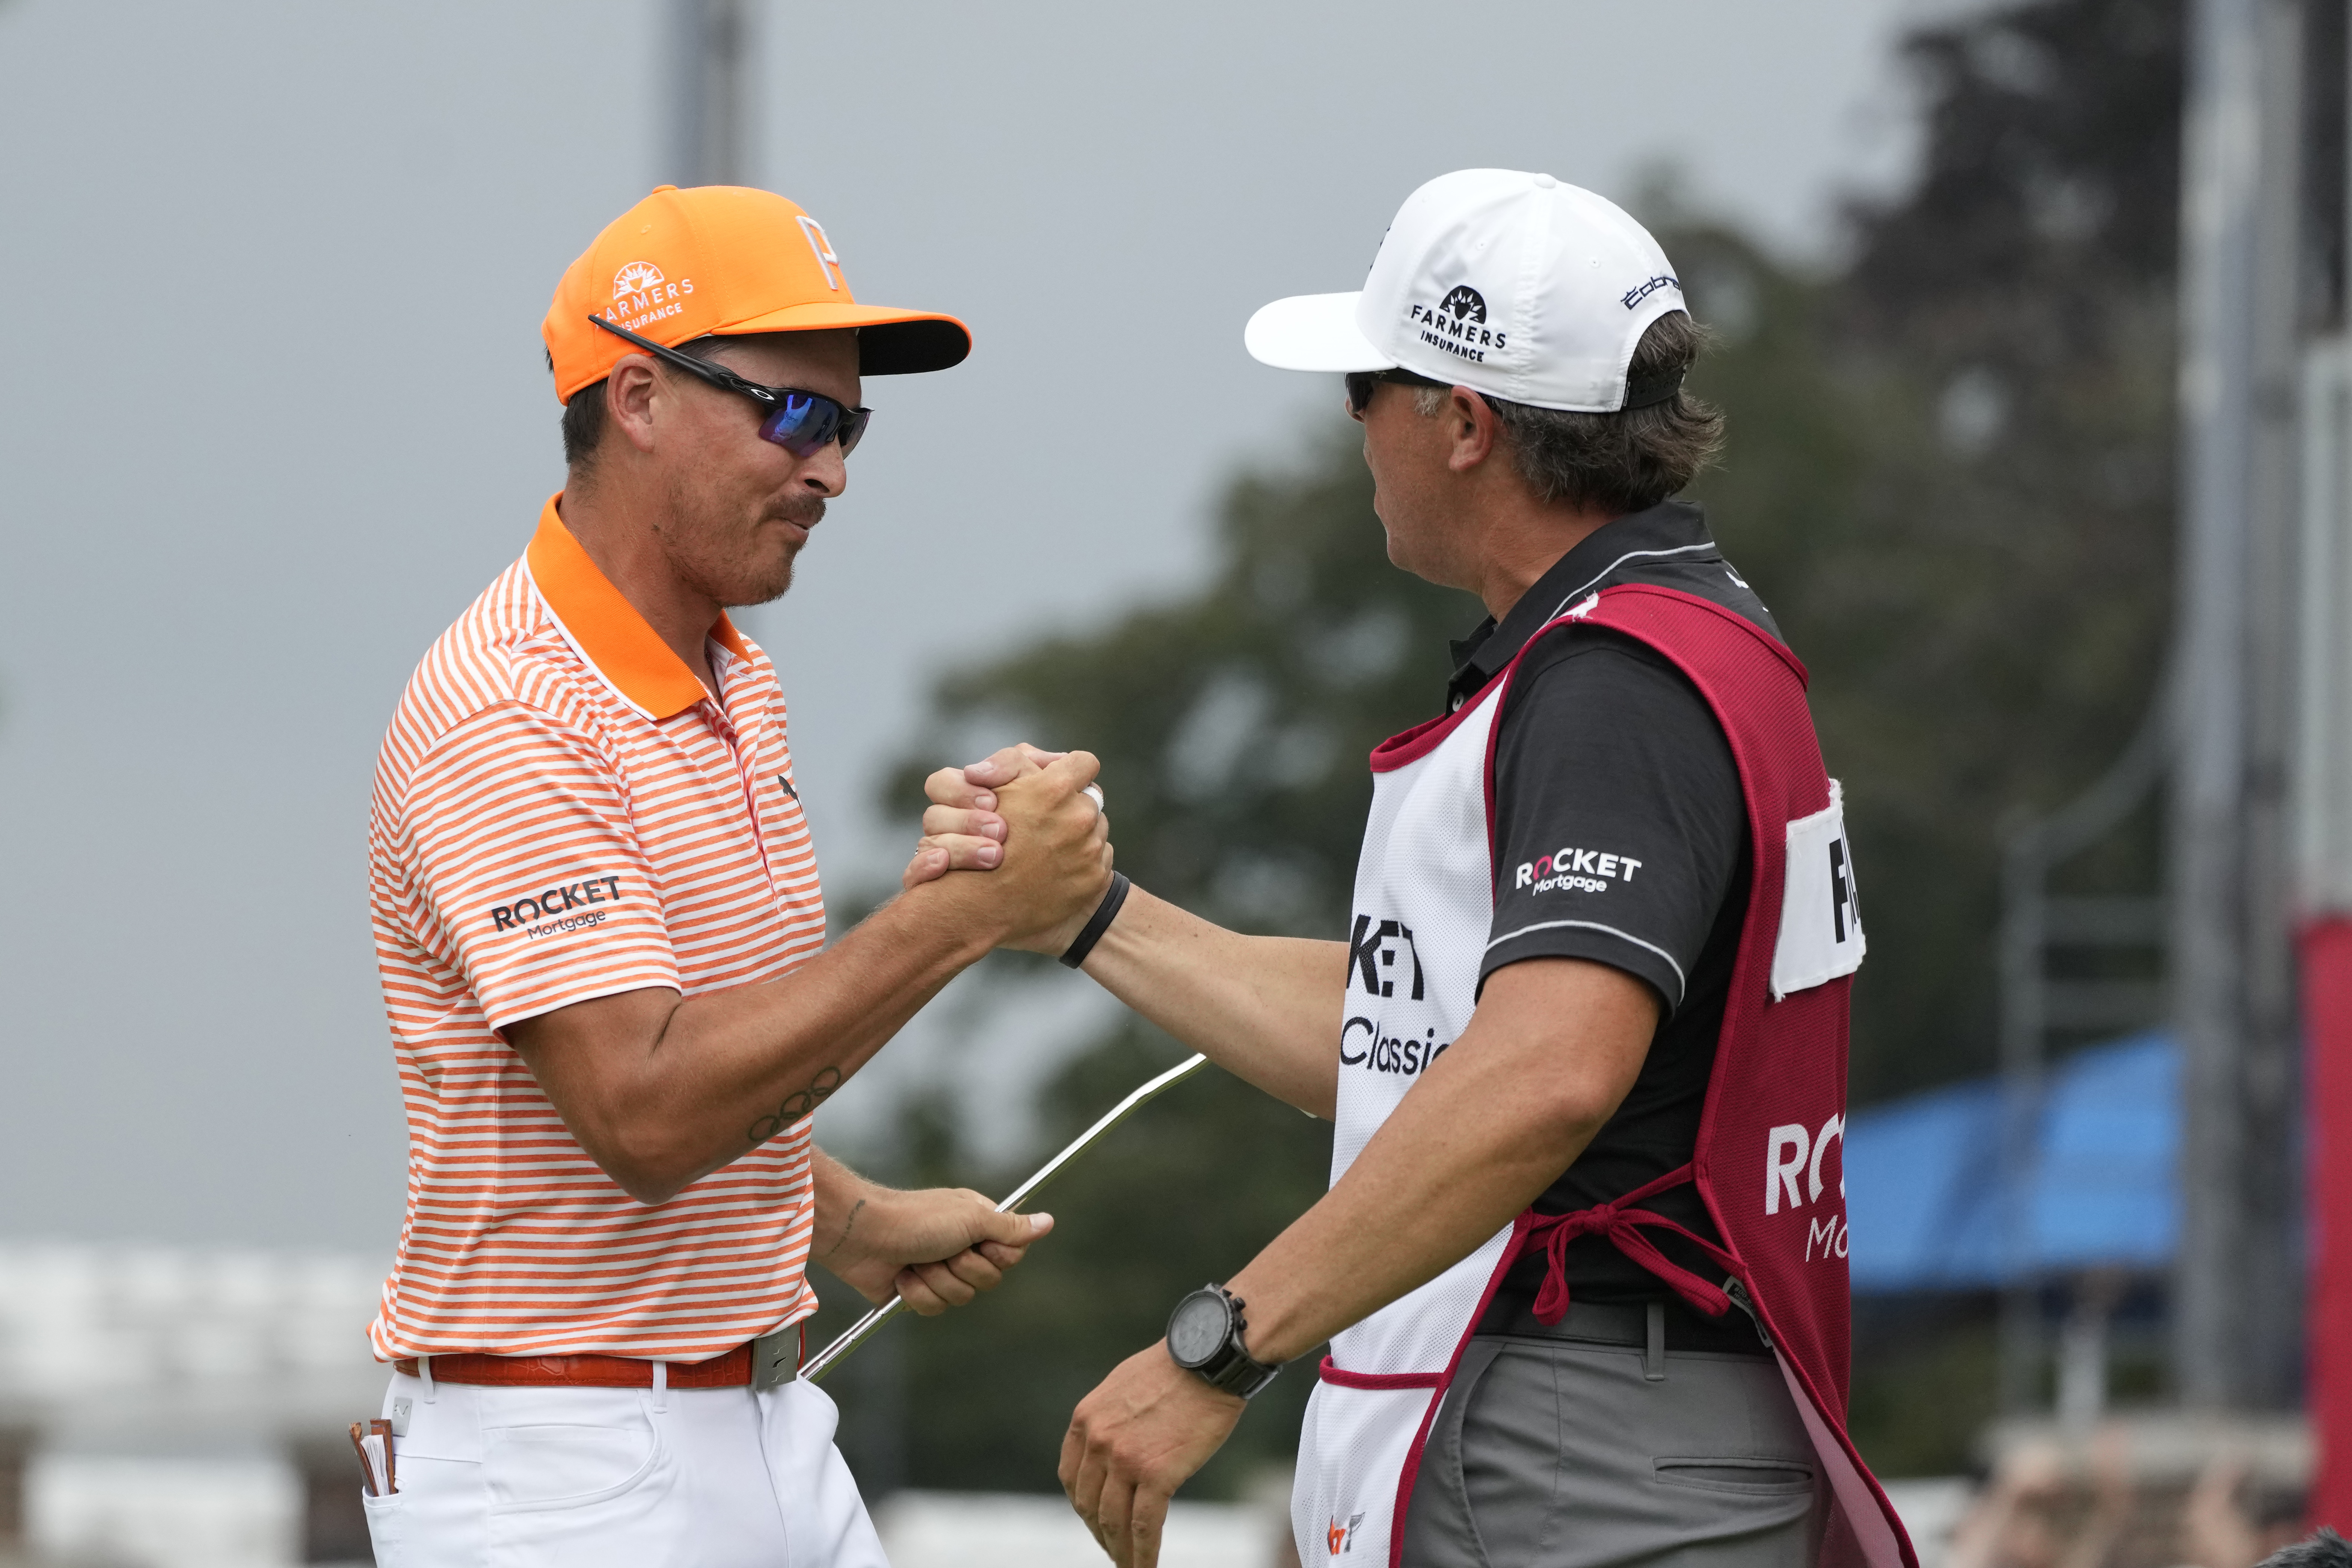 Rickie Fowler steps up in Rocket Mortgage Classic playoff for 1st PGA Tour win in 4 years